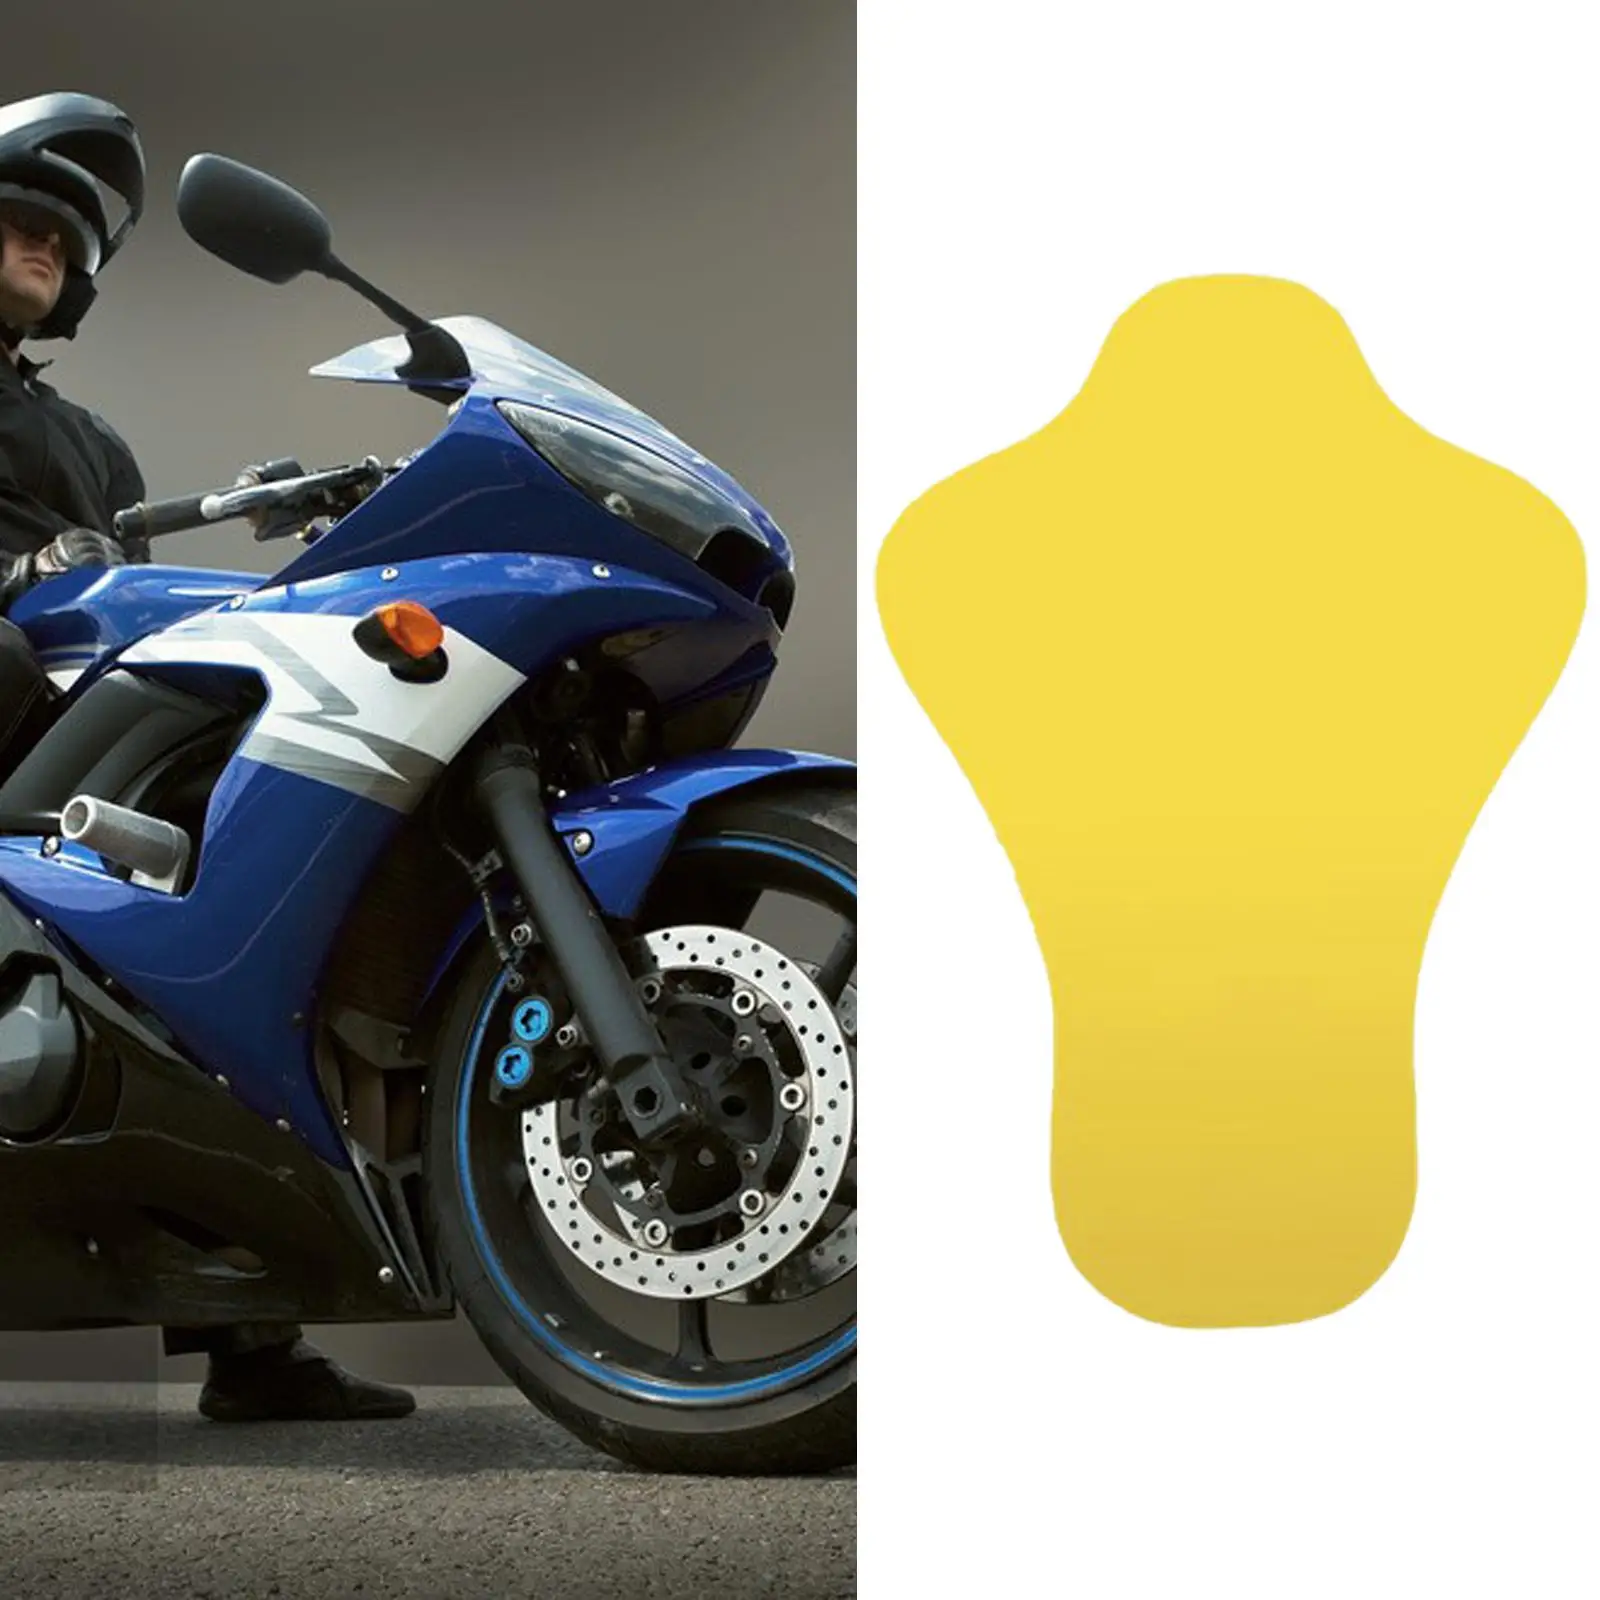  Motorcycle Lightweight Vest Breathable Motorbike Protection